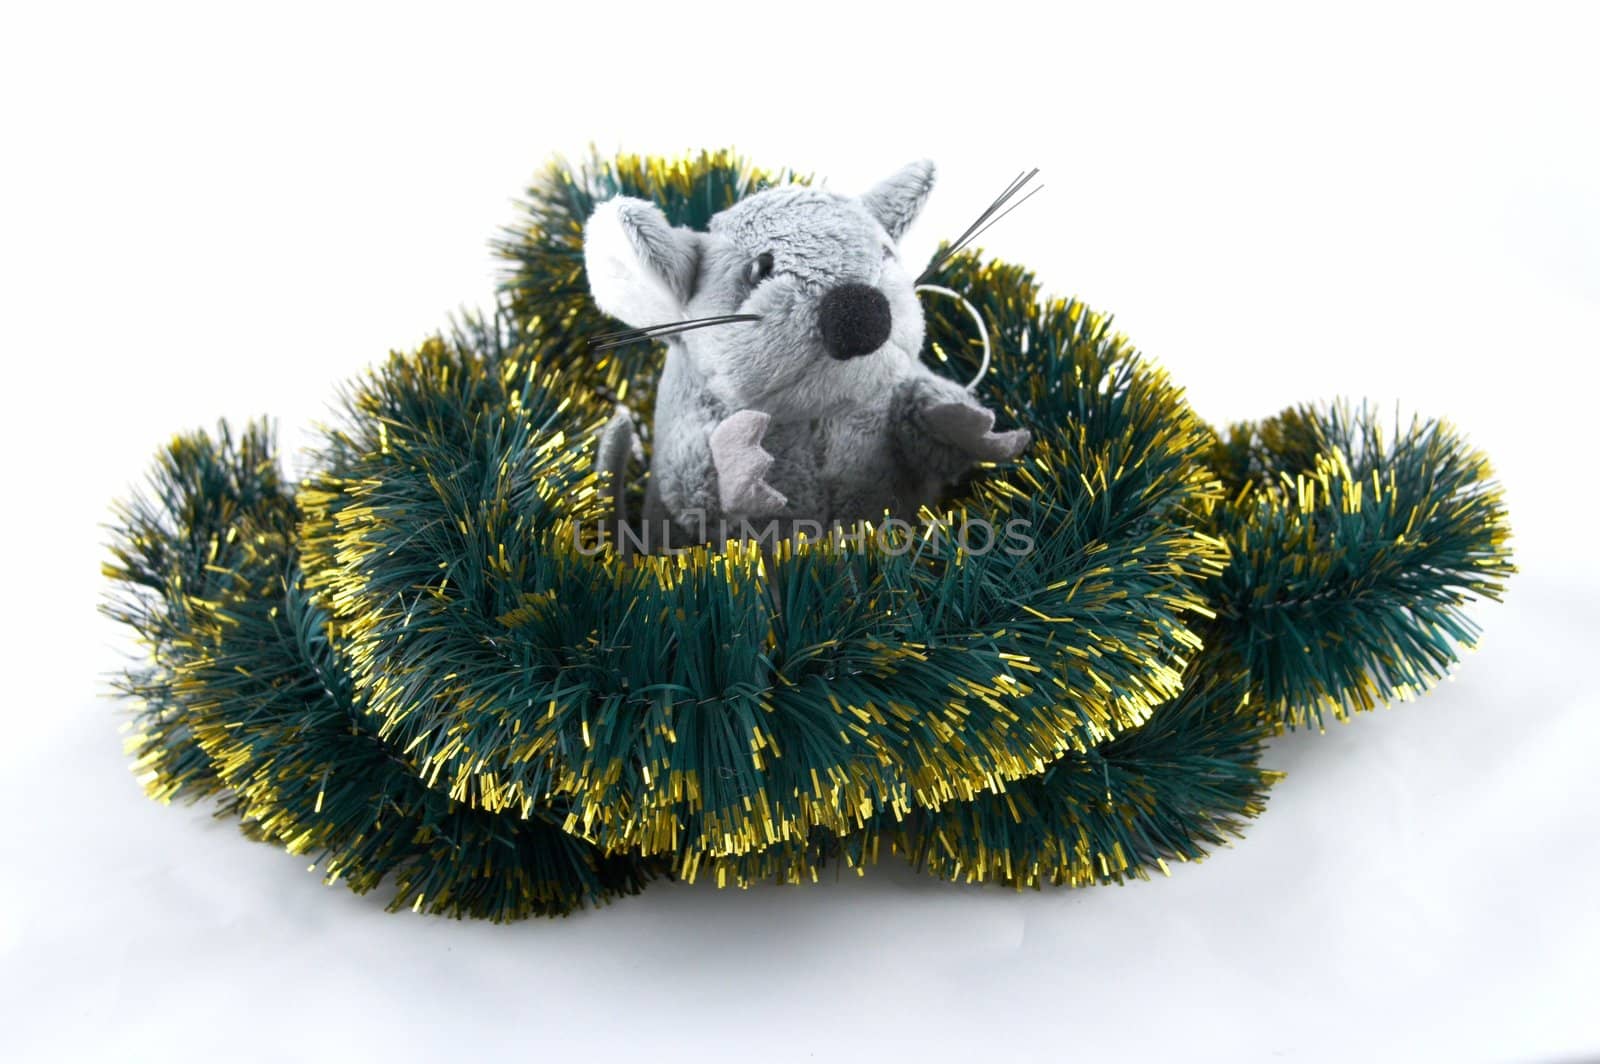 The grey toy mouse sitting in a tinsel